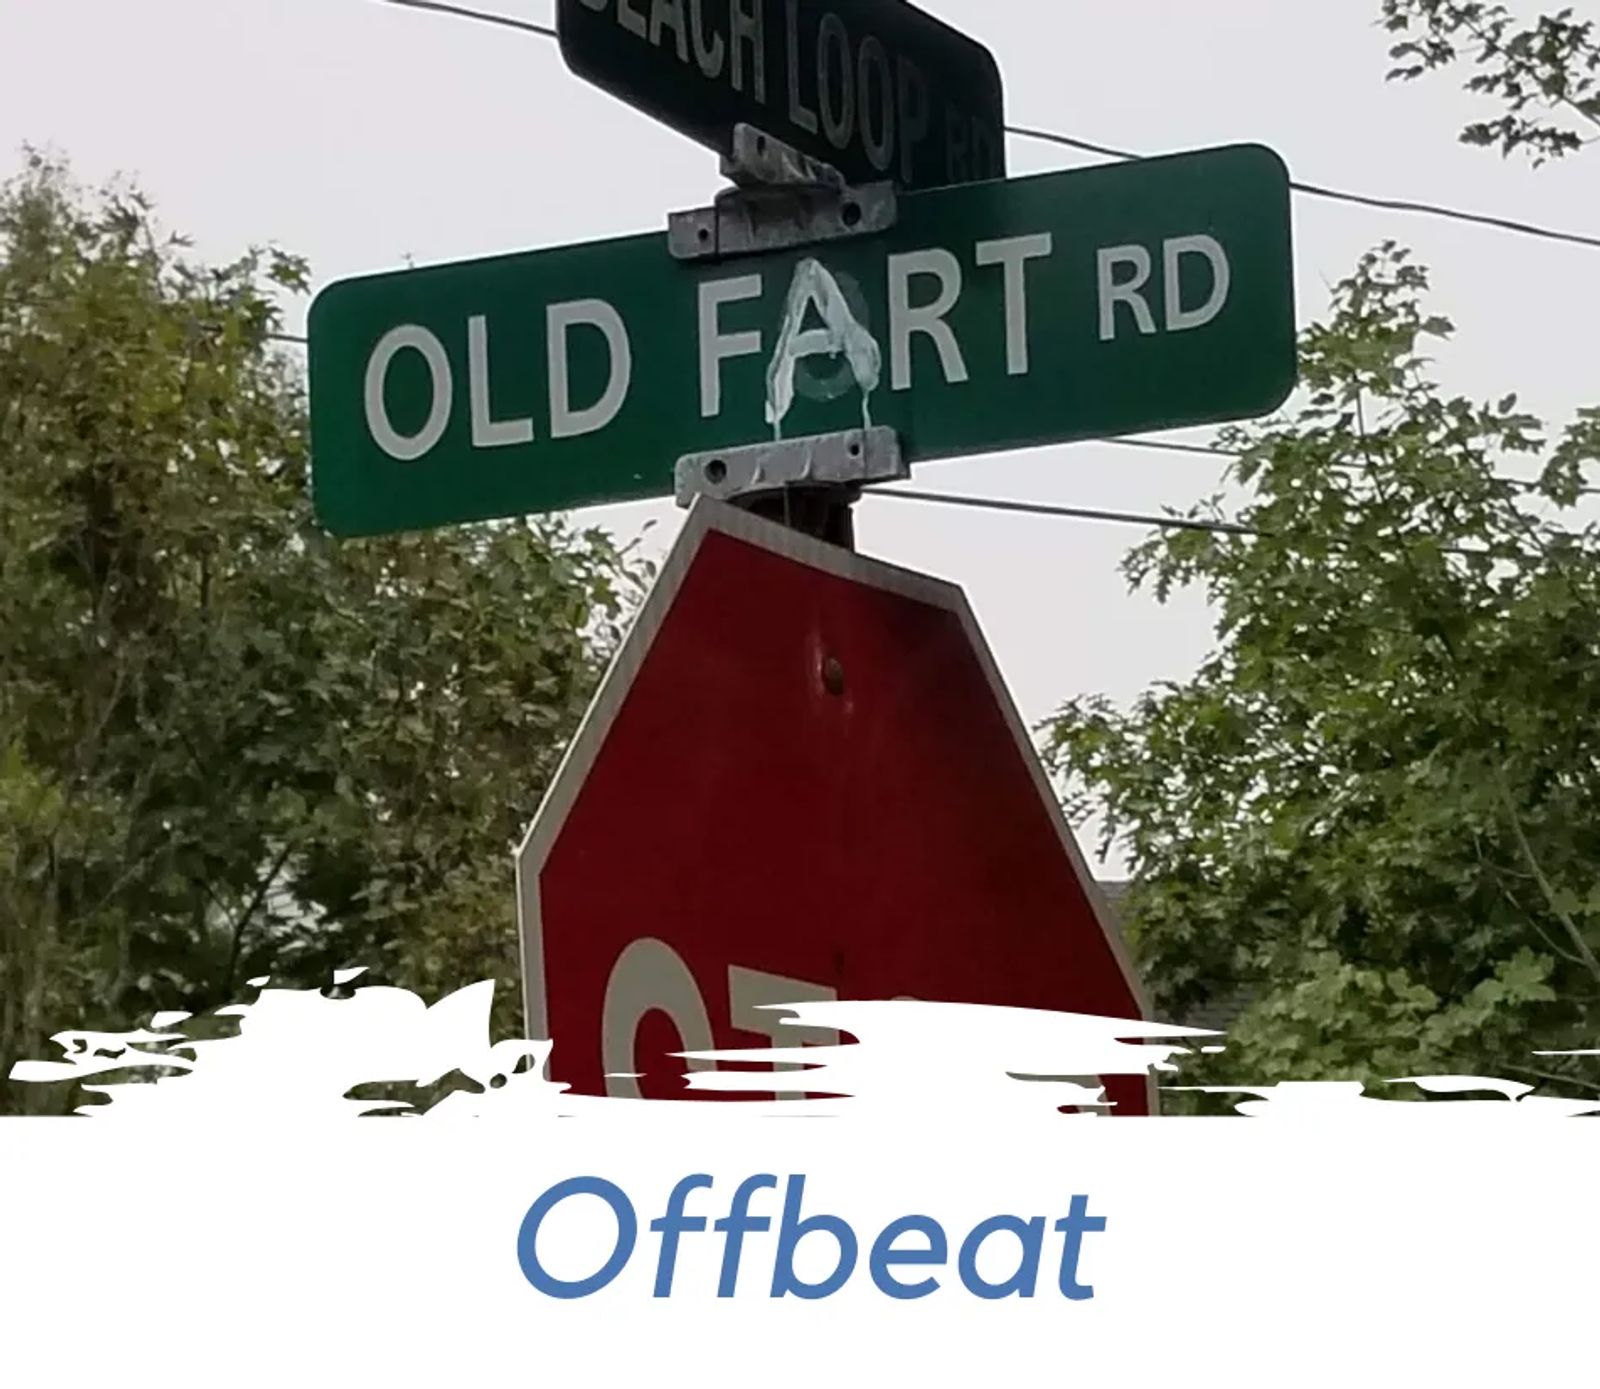 Photo of Old Fart Road street sign